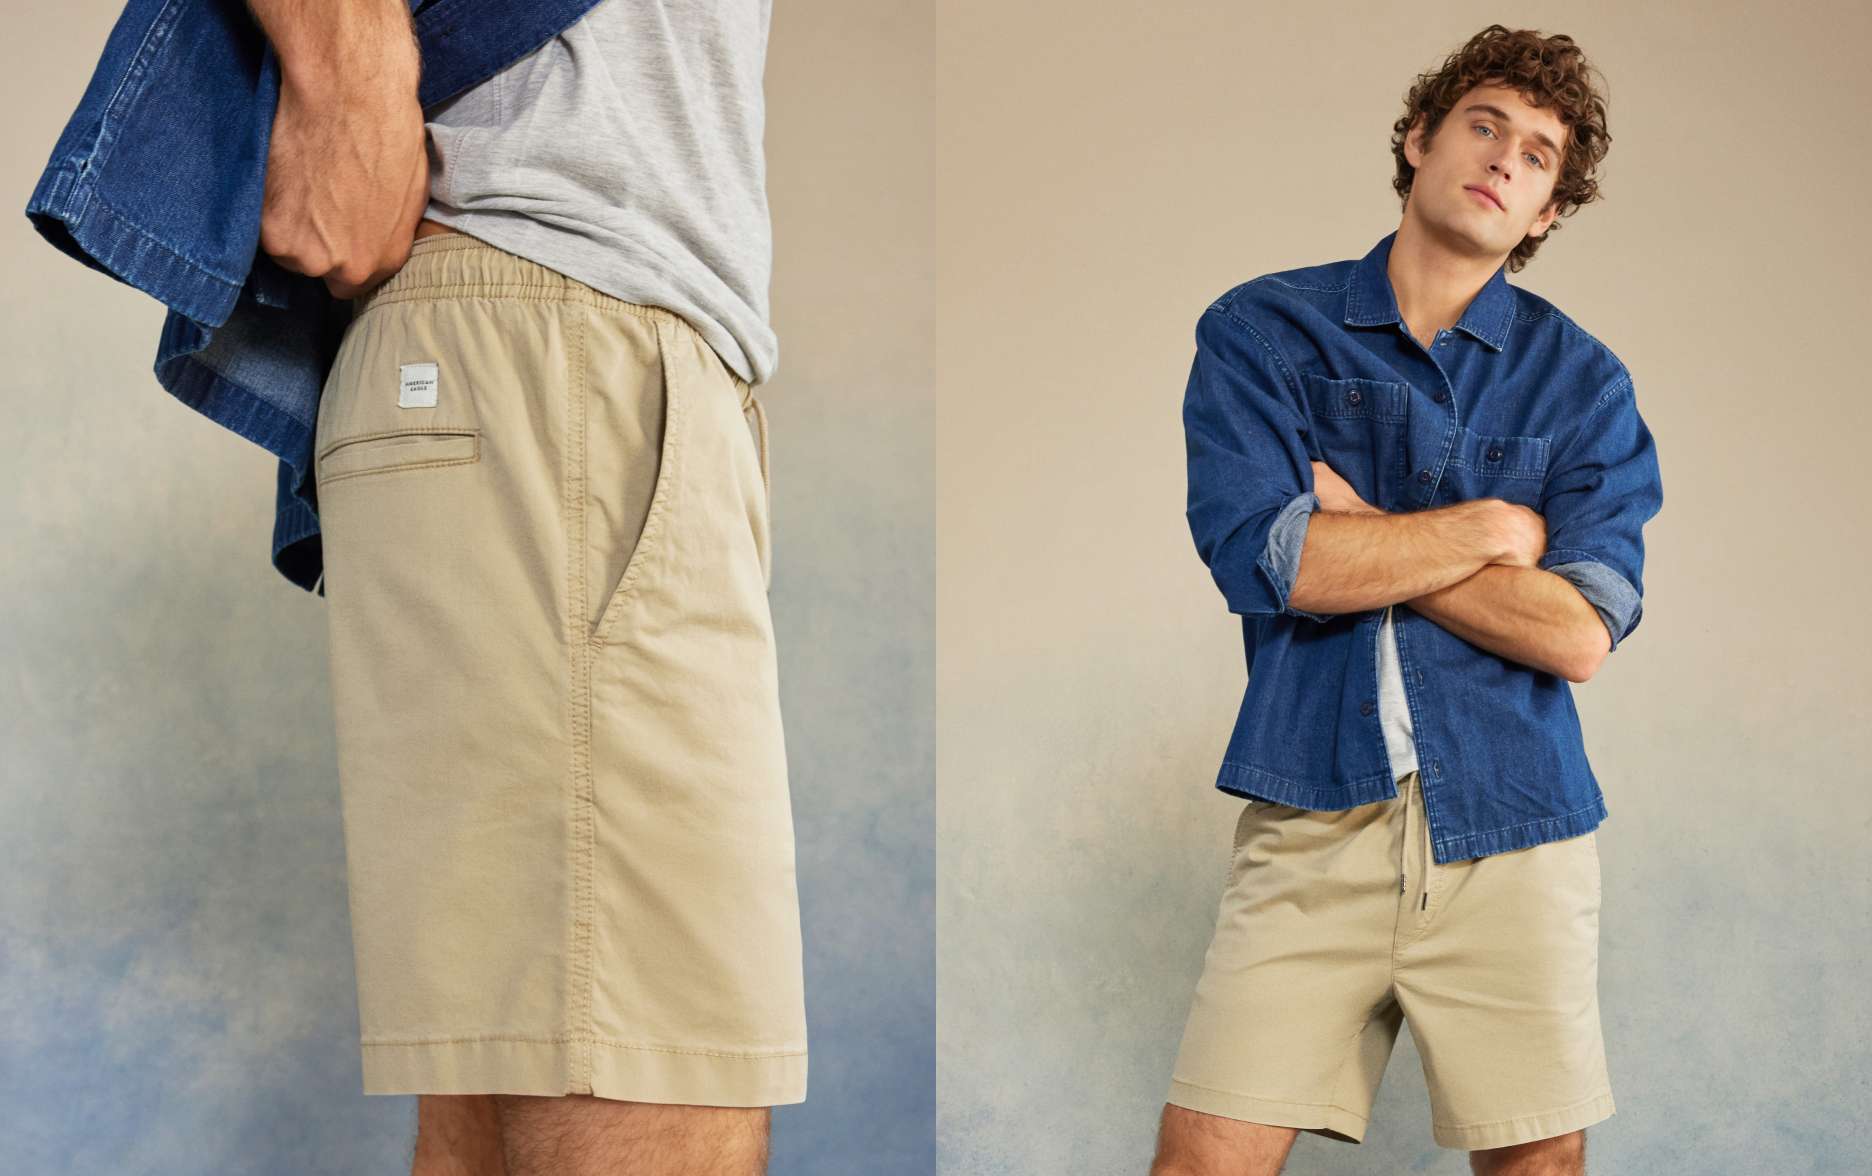 Model in tan shorts with white shirt and blue button up